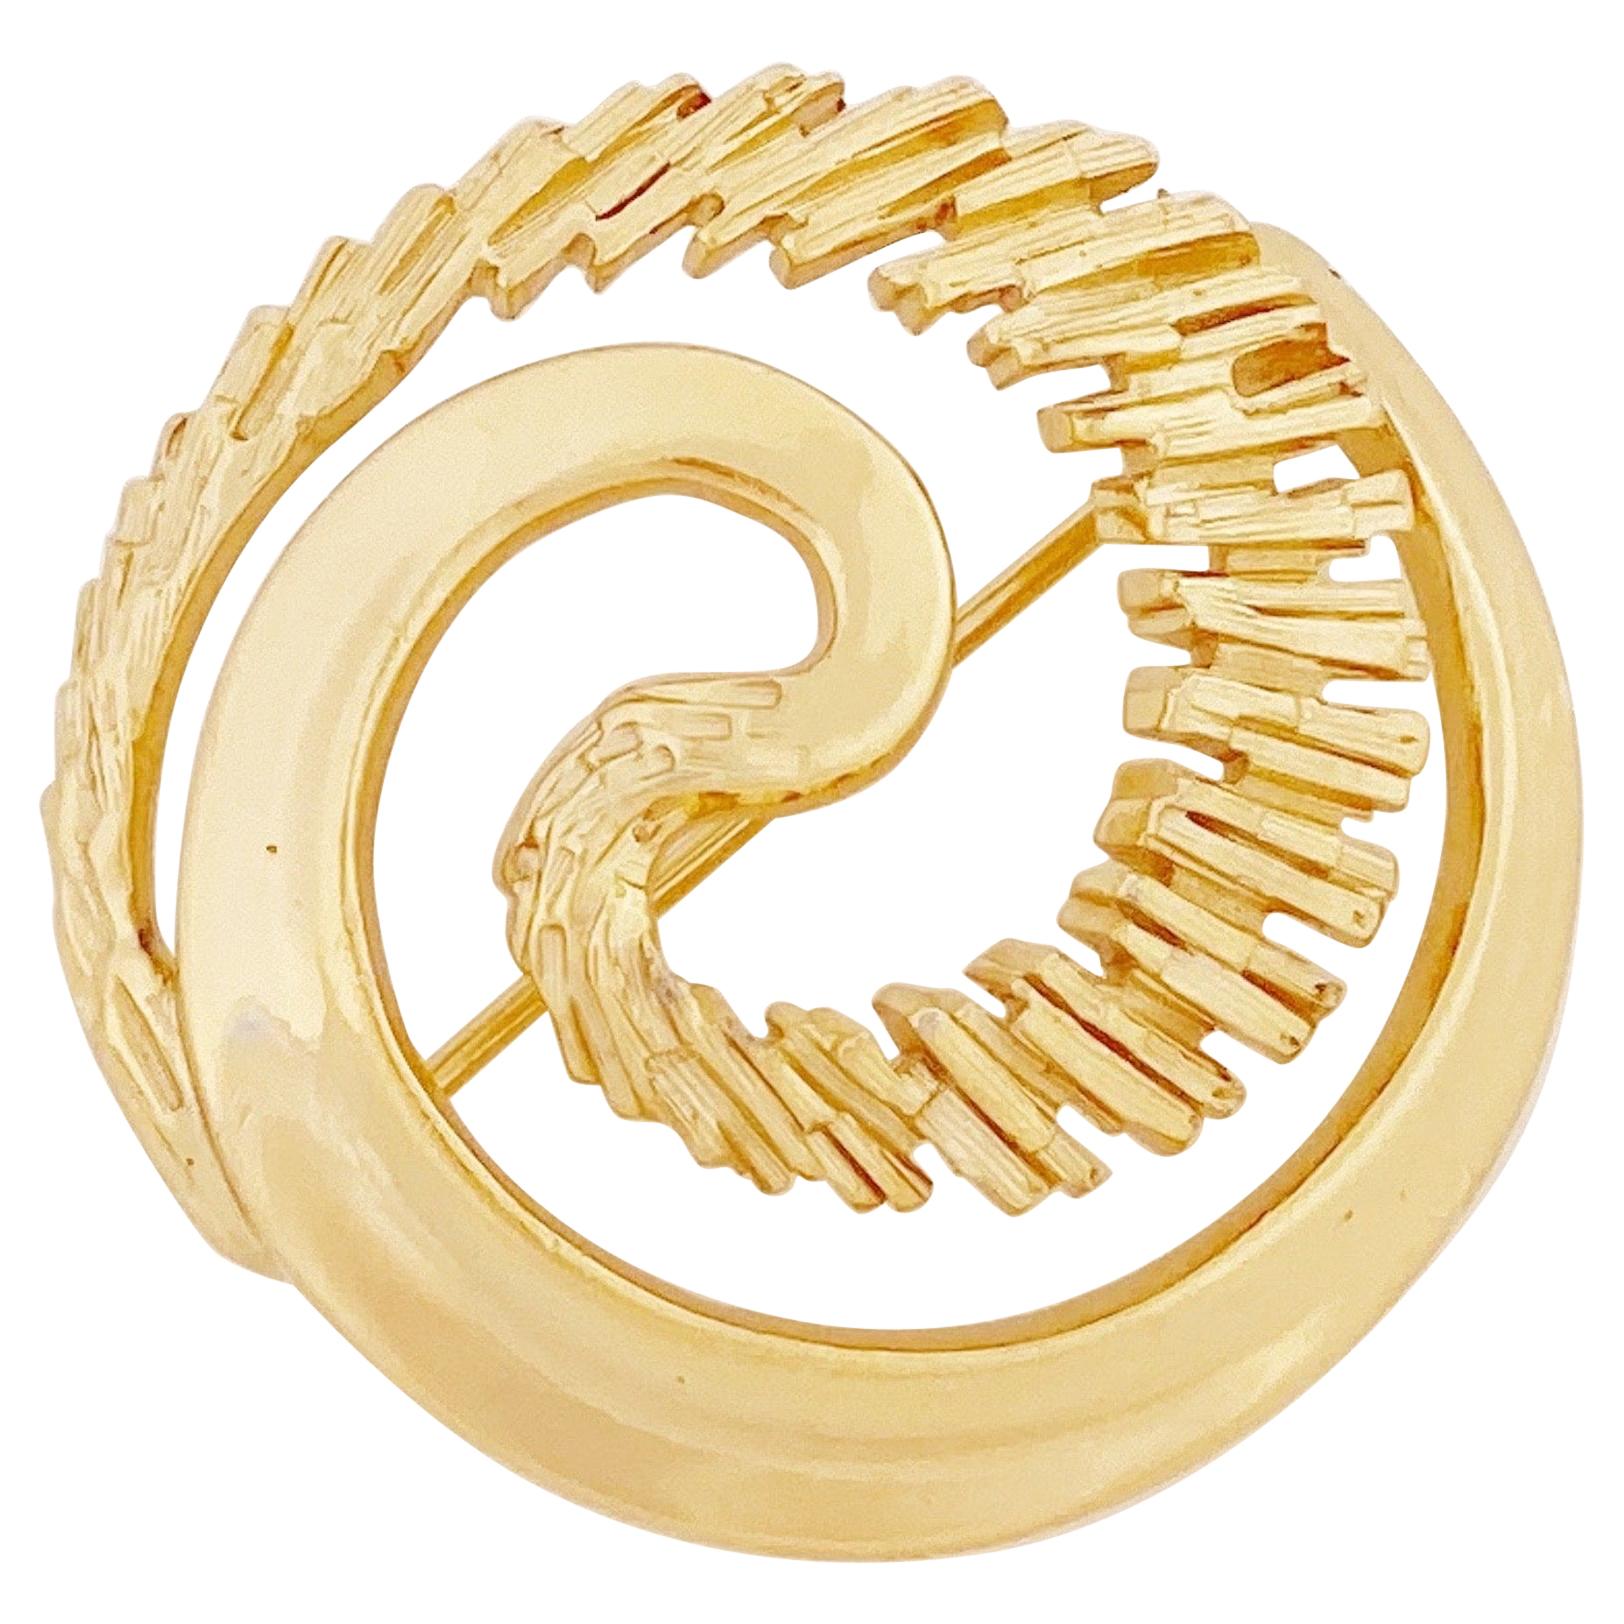 Gilded Modernist Brutalist Abstract Circle Brooch By Napier, 1980s For Sale